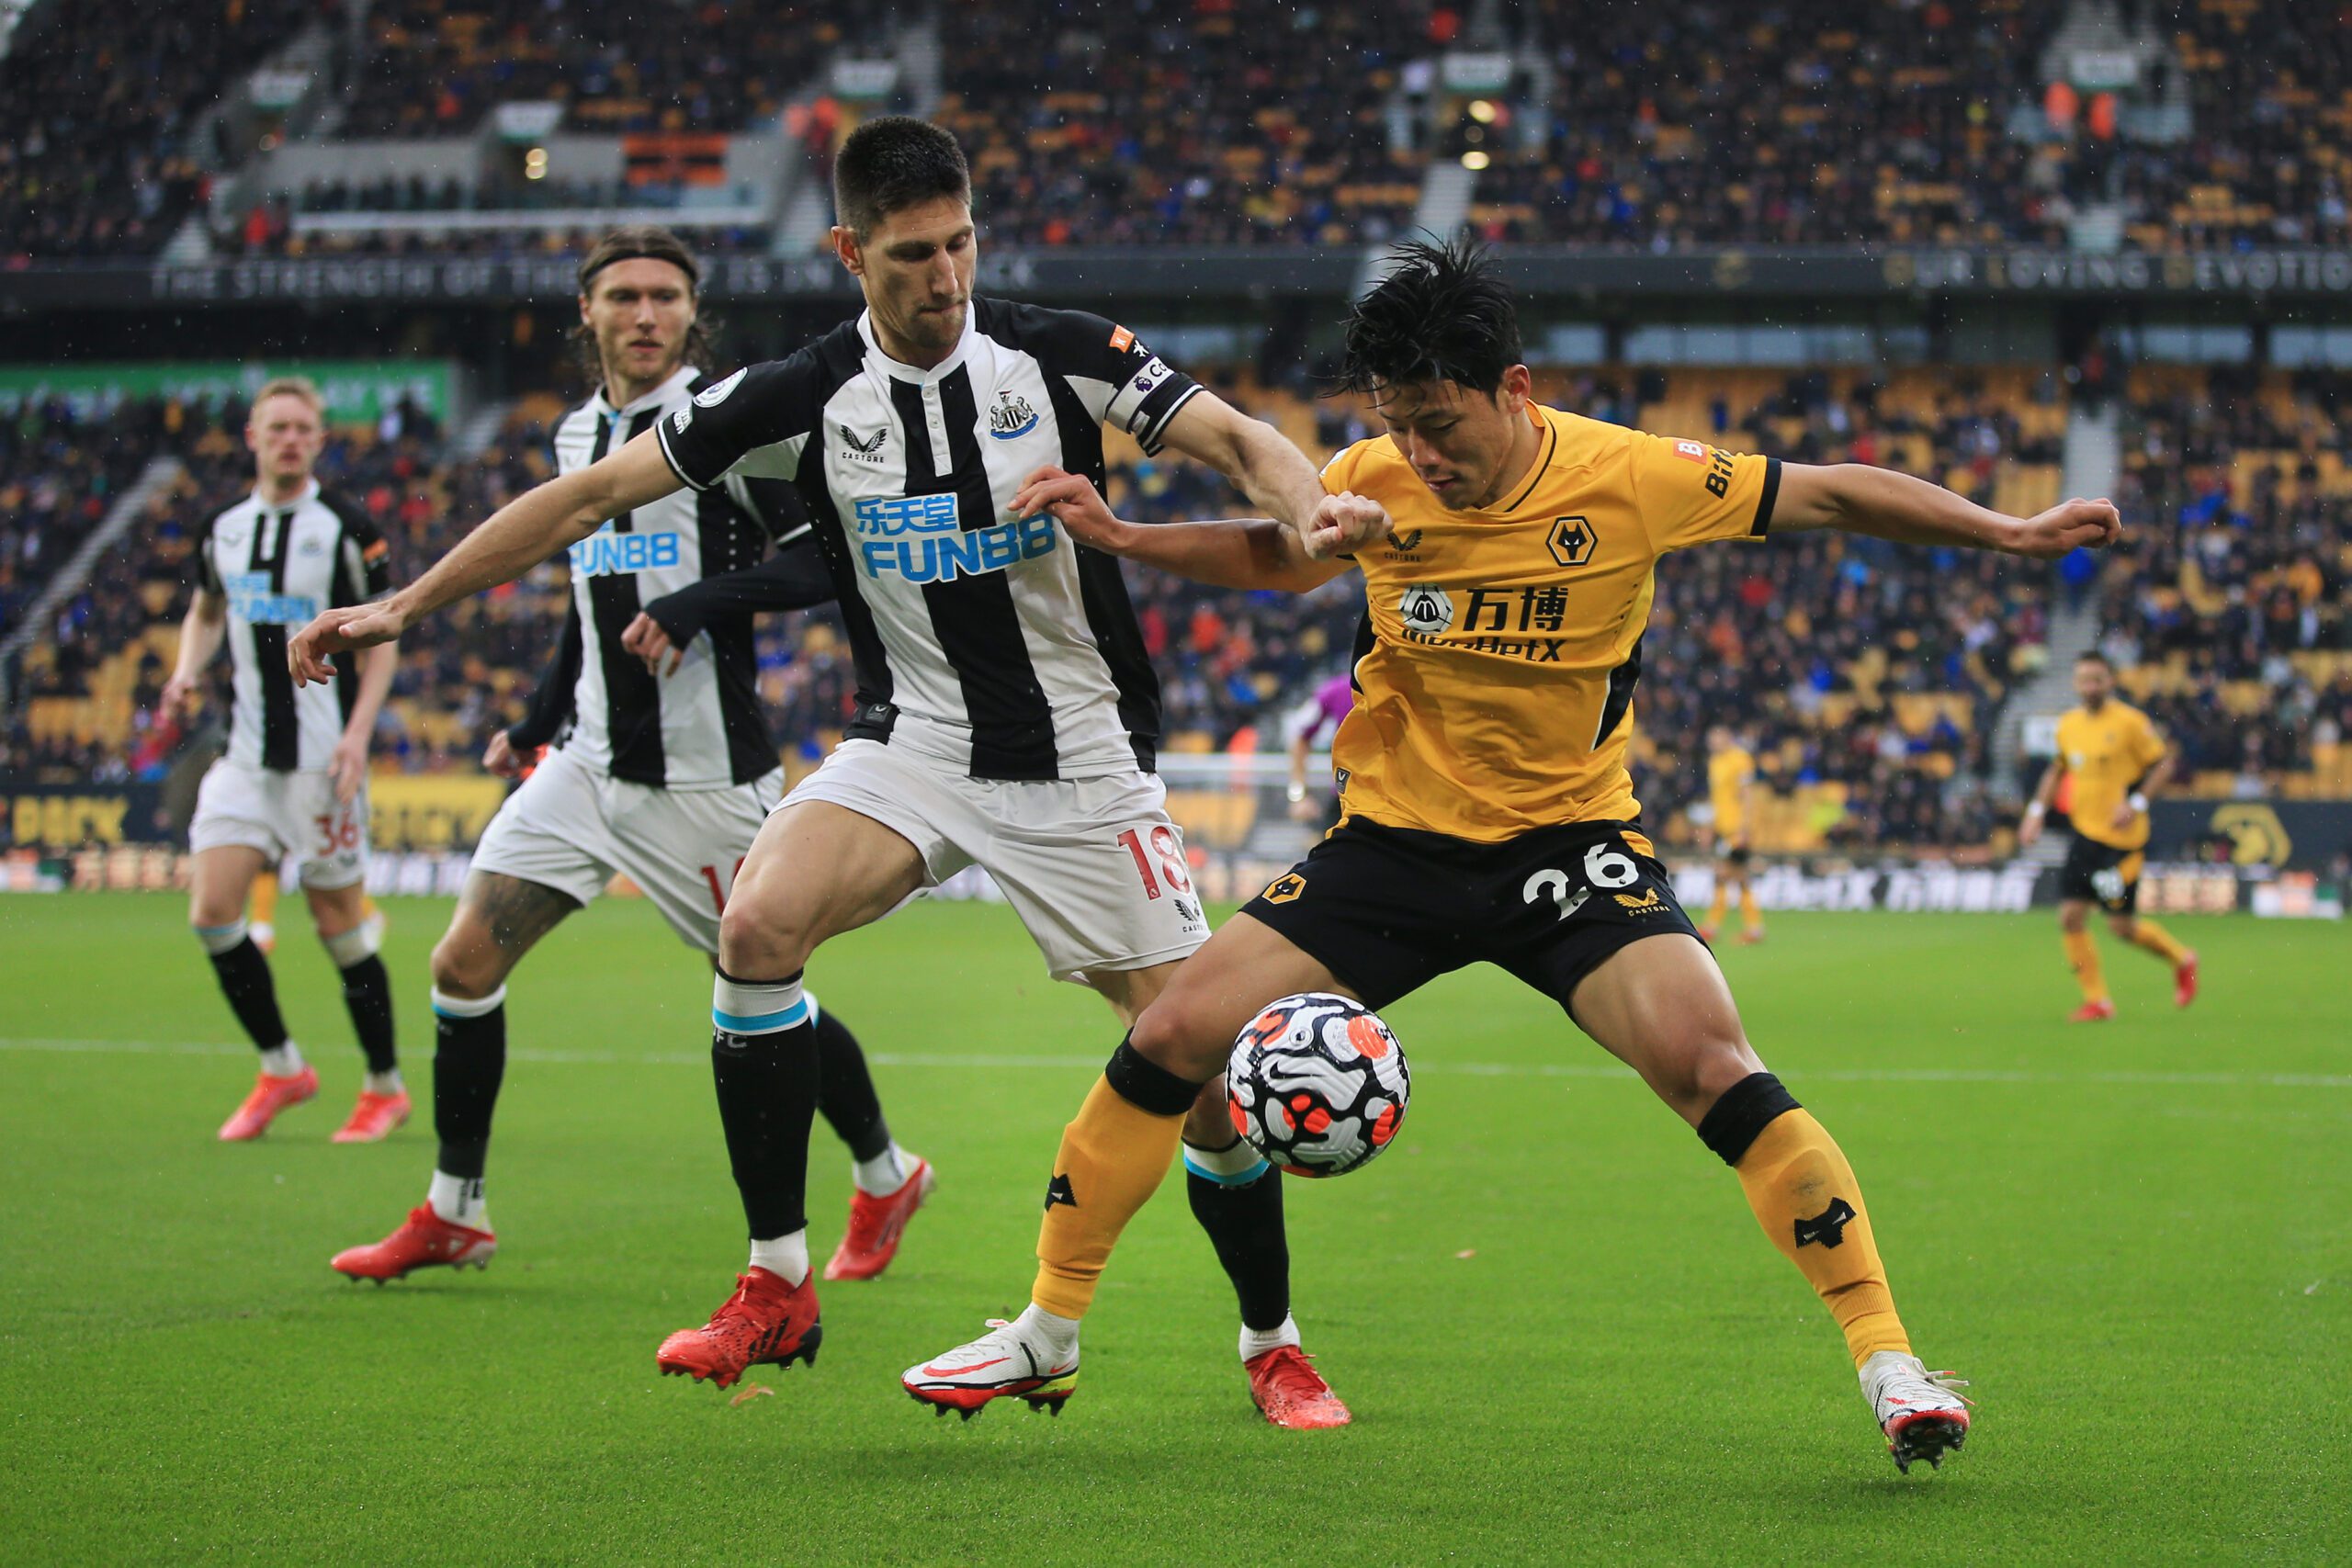 Former Newcastle United defender Federico Fernandez insists players never discussed human rights issues at the time of the club's Saudi takeover